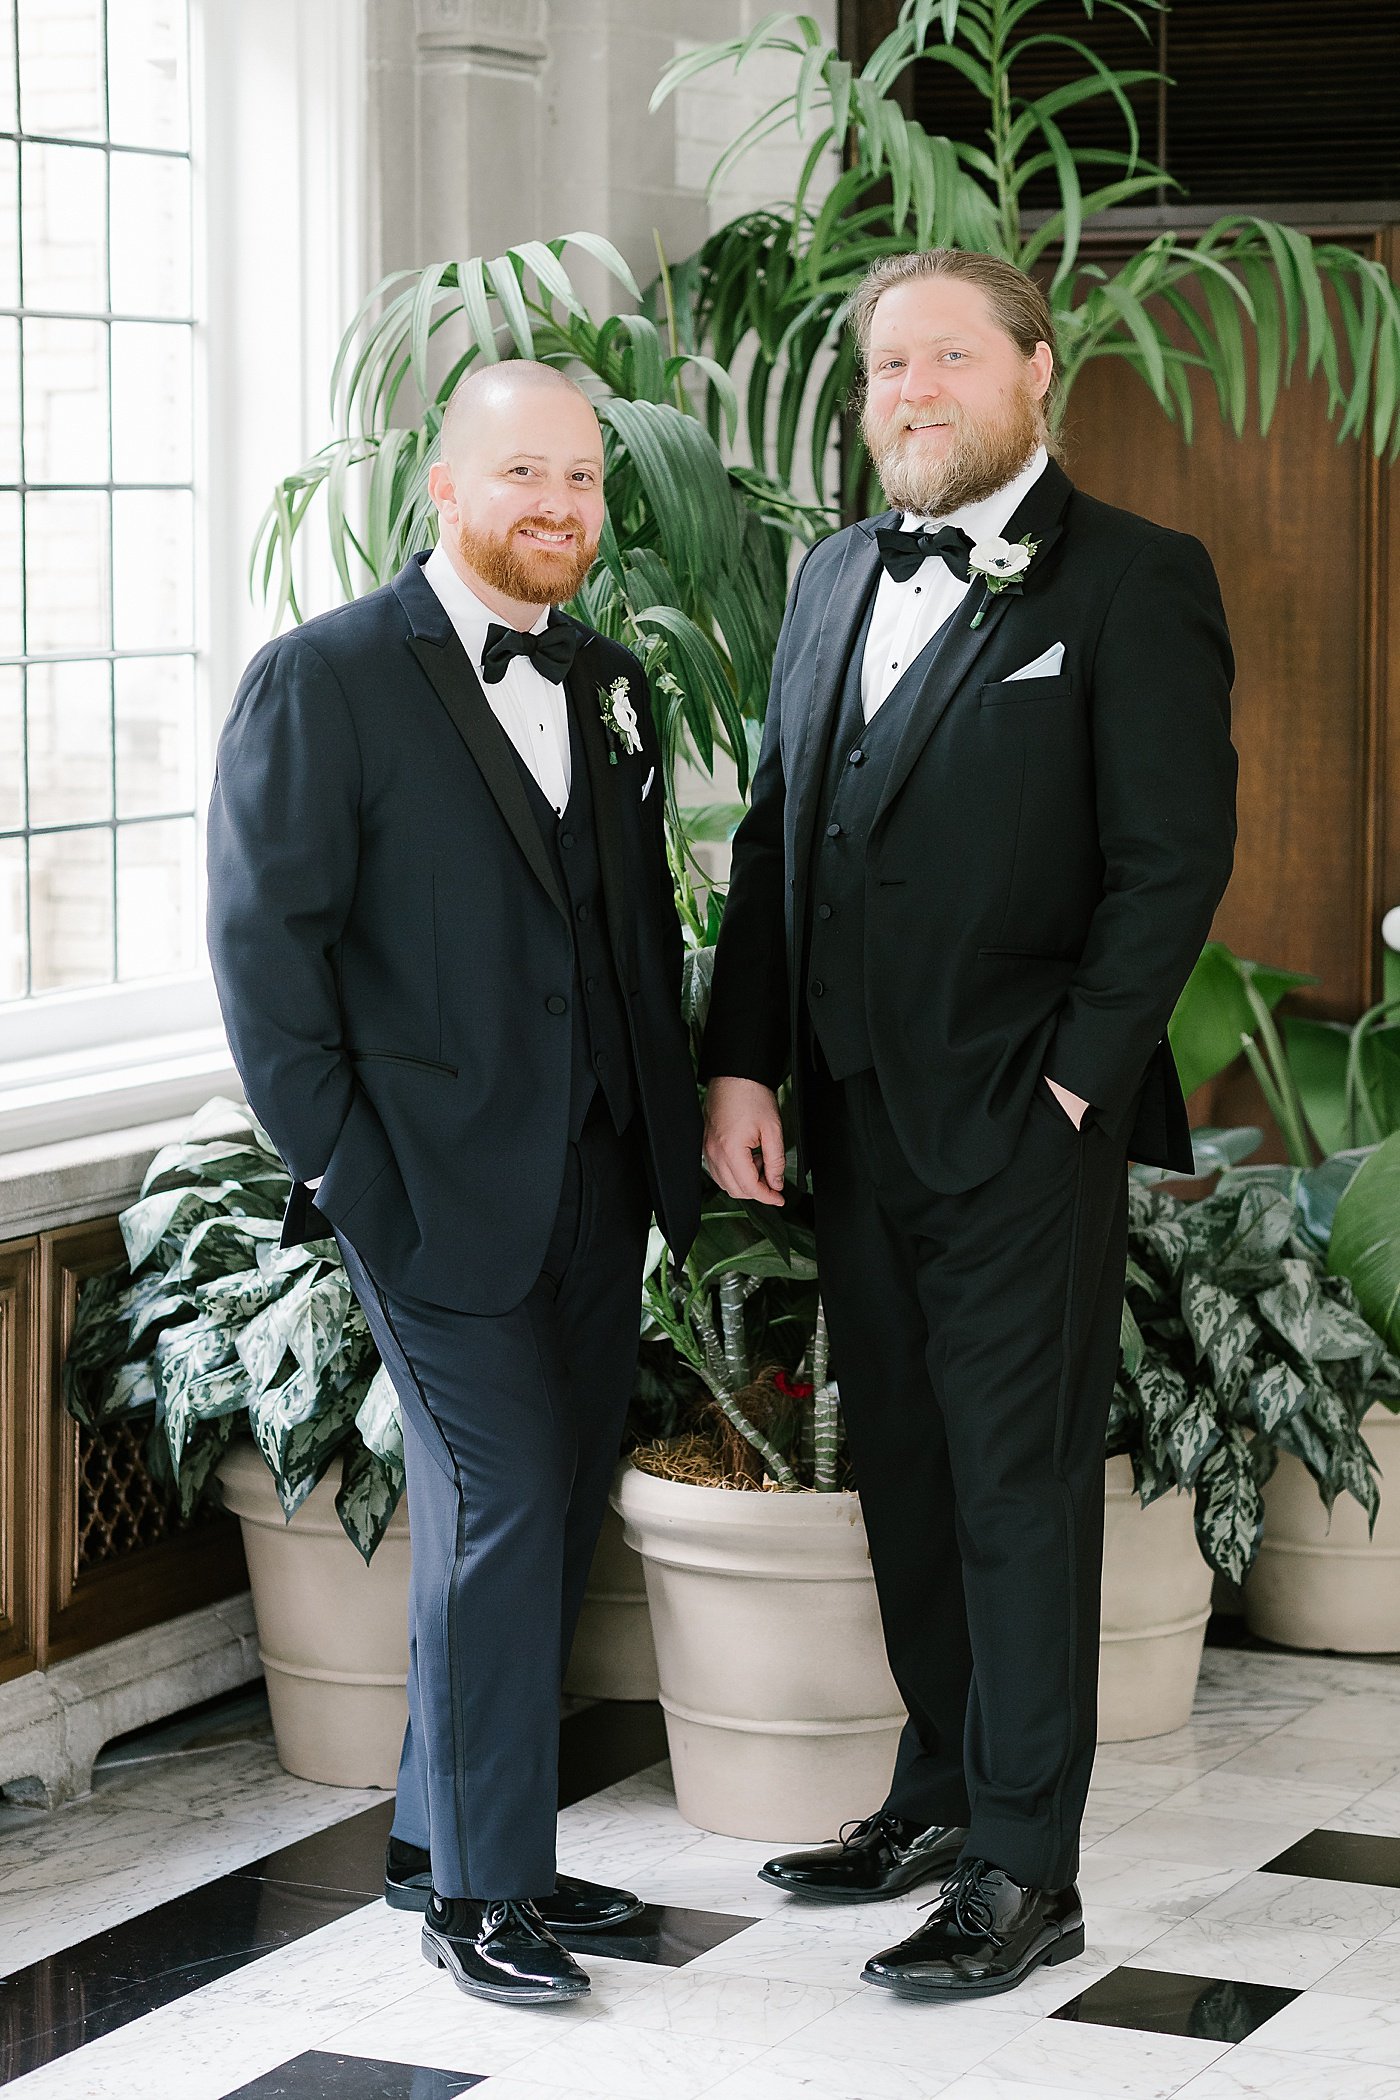 Rebecca Shehorn Photography Alex and Andrew's Laurel Hall Indianapolis Wedding-300.jpg